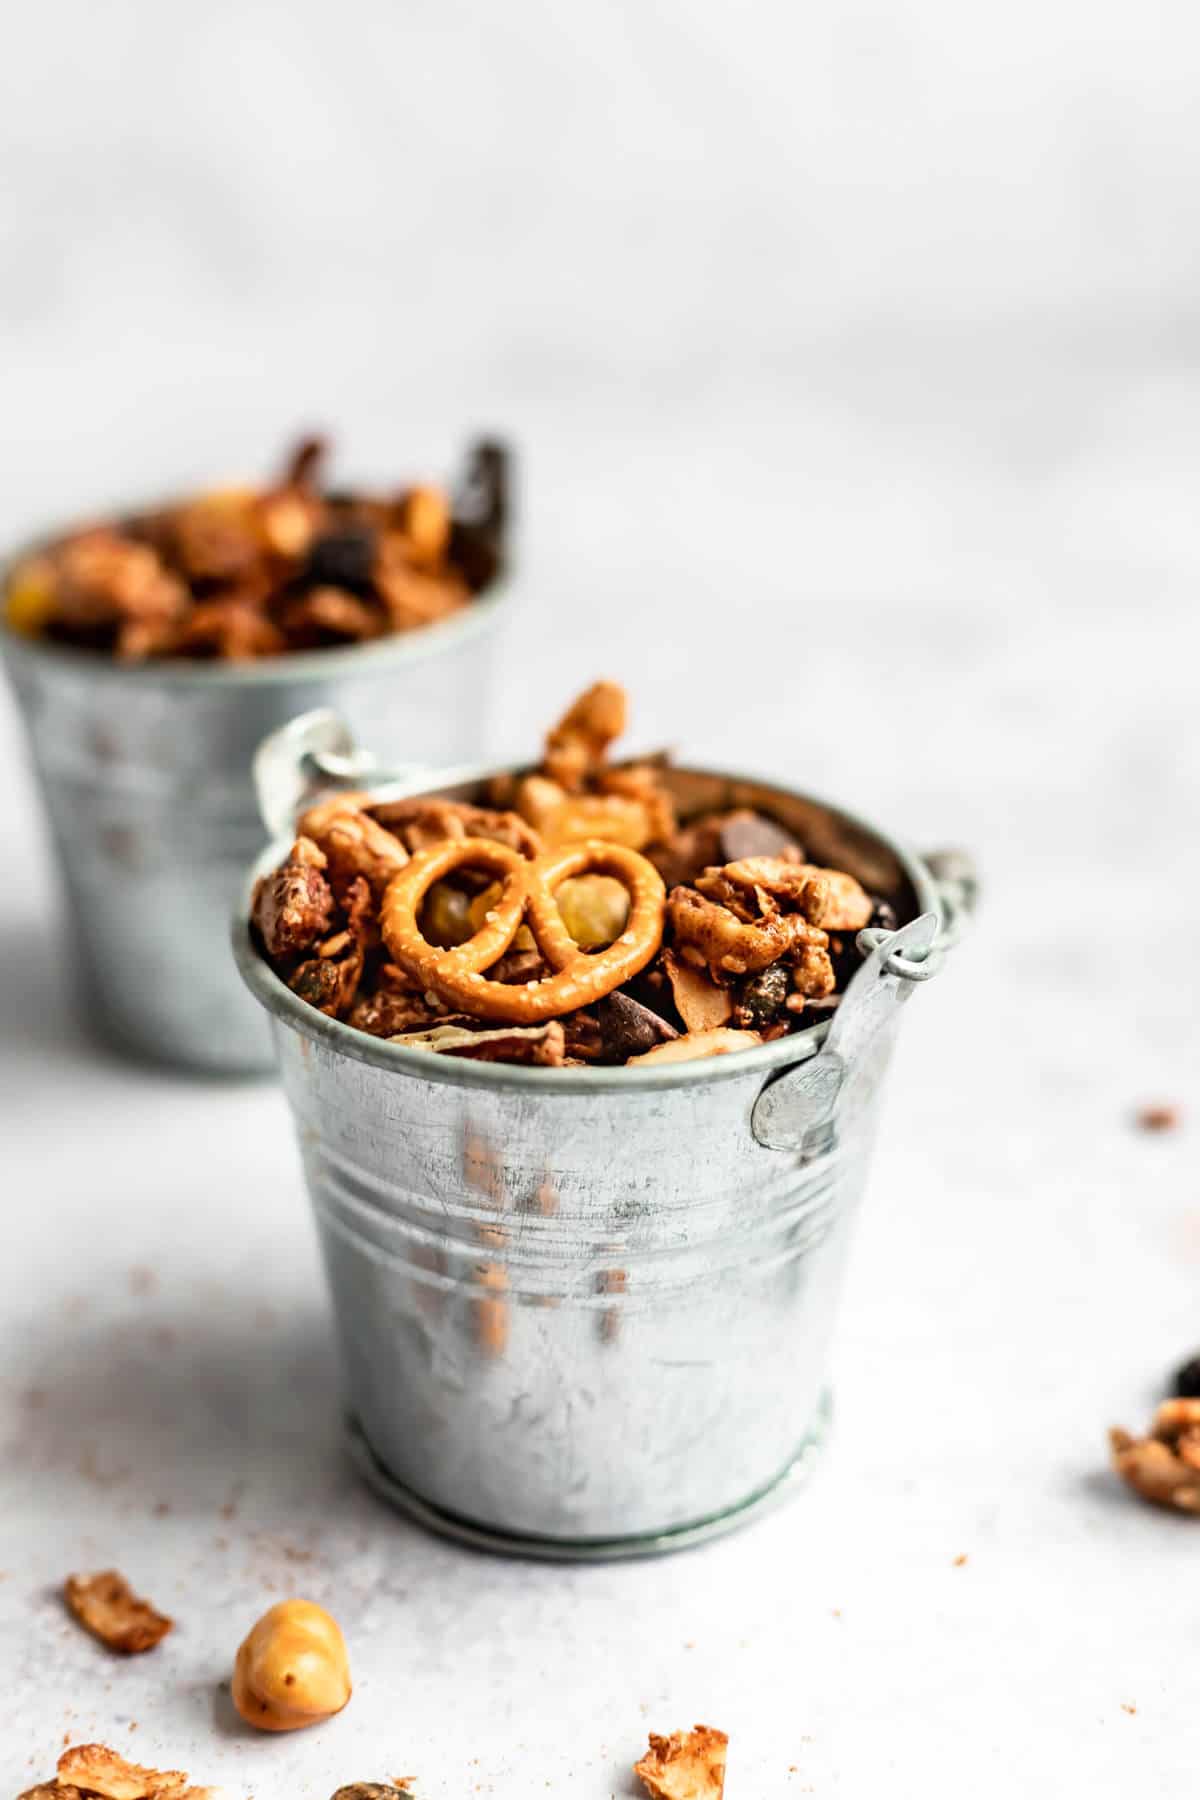 a small metal bucket filled with nutty snack mix and pretzels with a few pieces scattered around